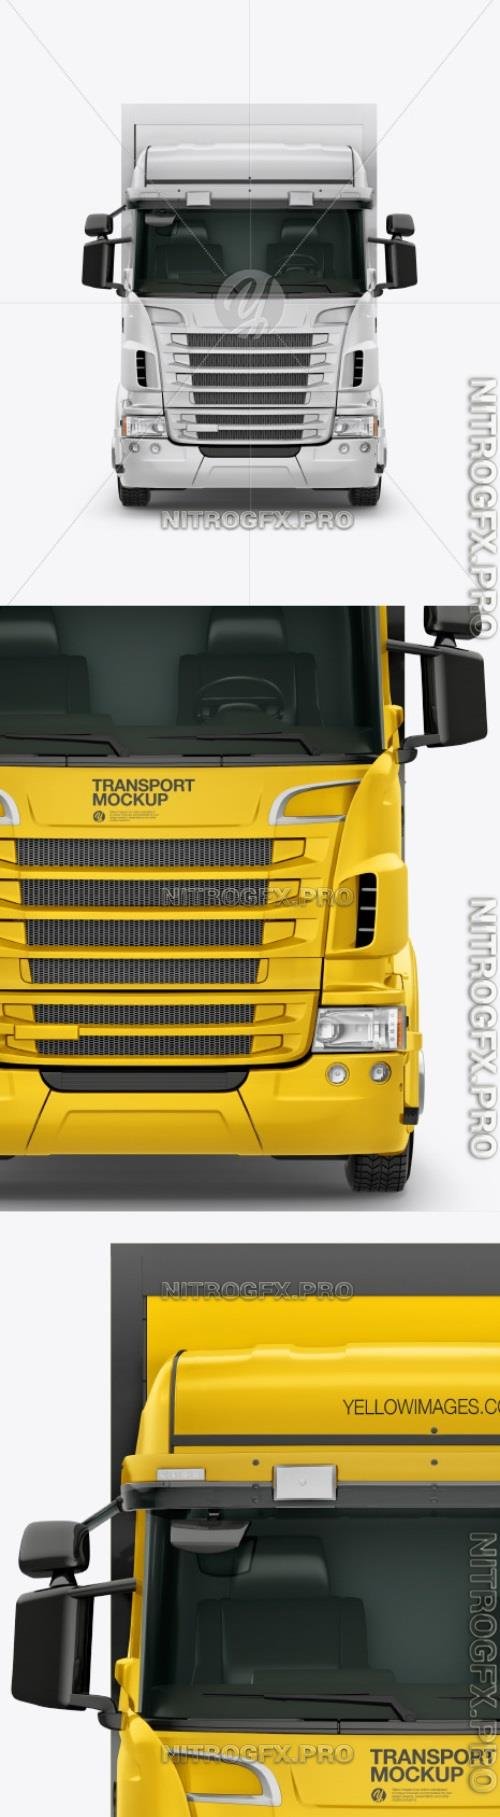 Truck Mockup - Front View - 46536